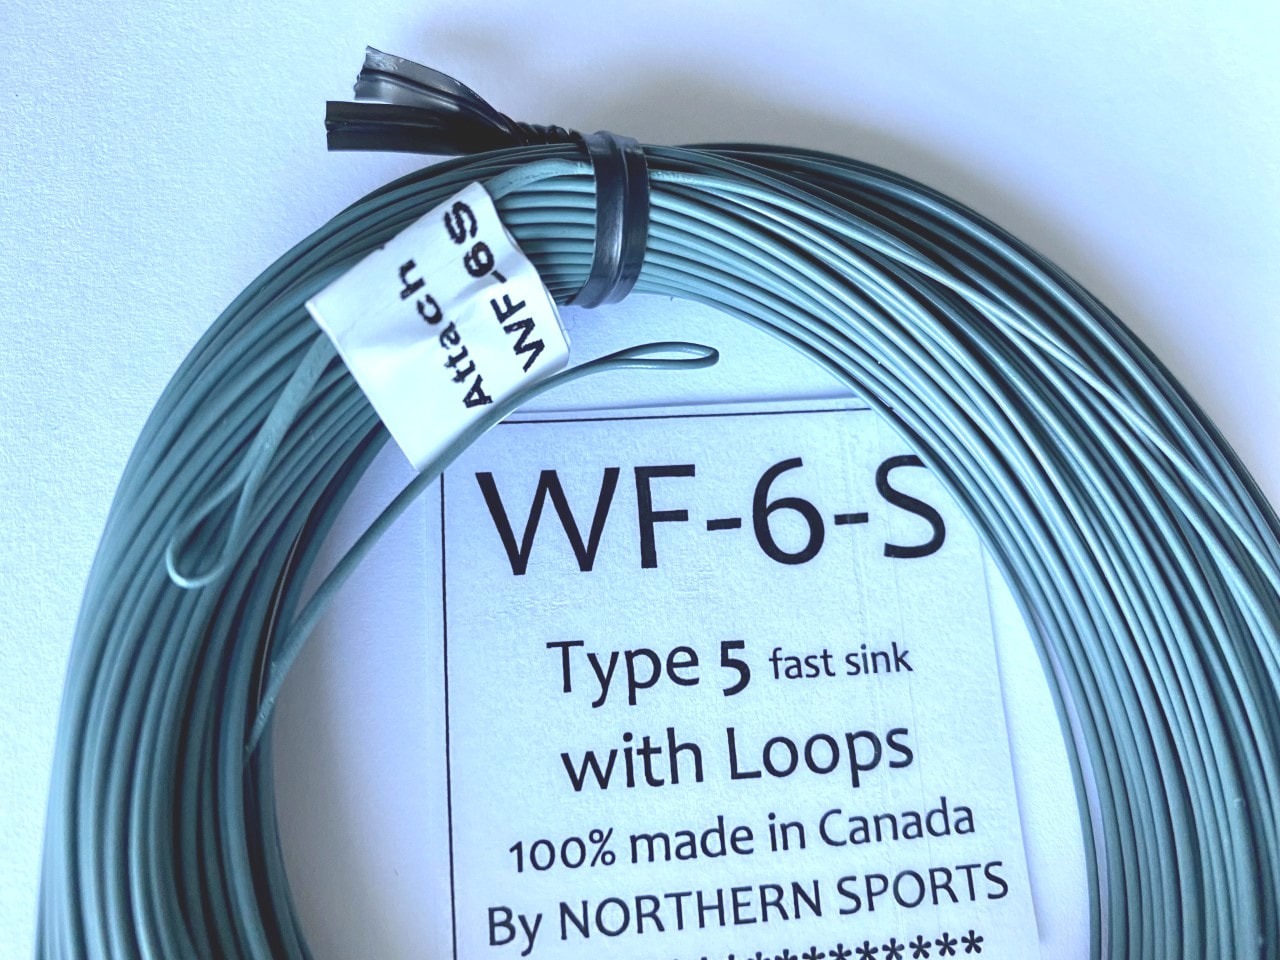 WF-7-S fly line EXTRA FAST SINK type 7 FULL SINK with LOOPS *Made in Canada* 